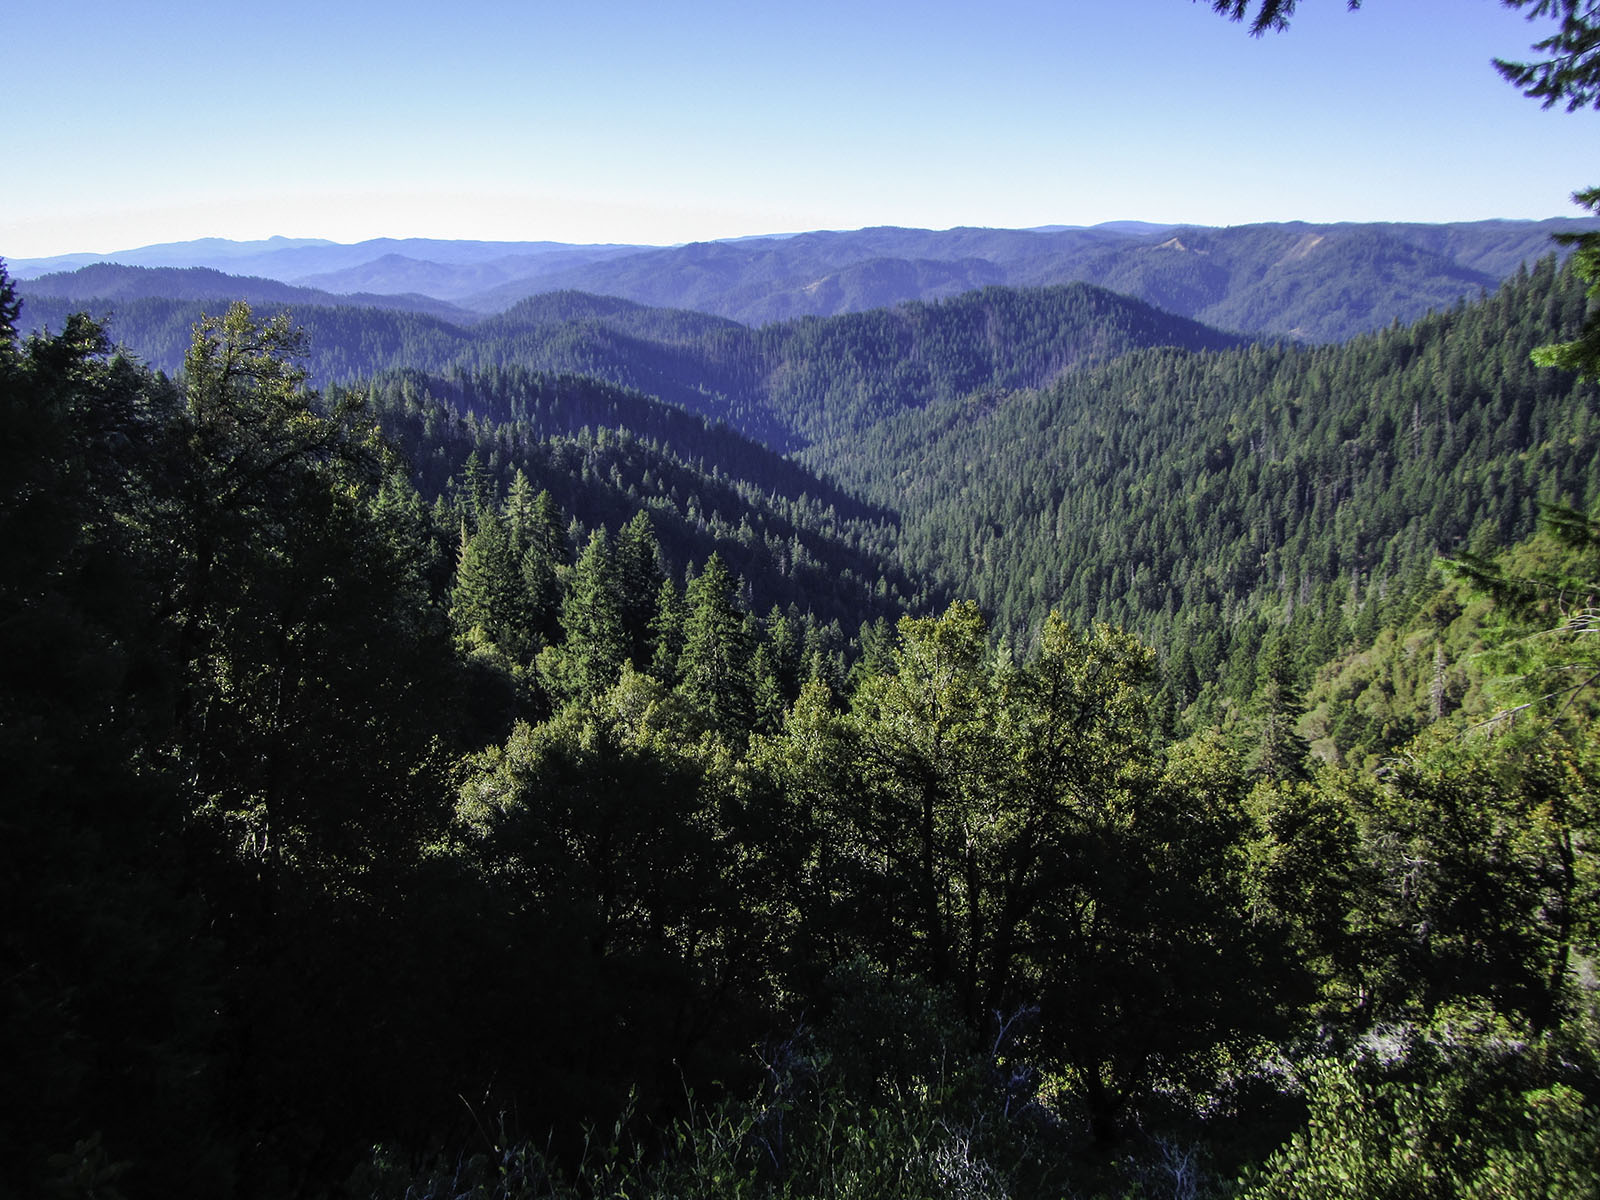 Protecting America’s Wilderness Act